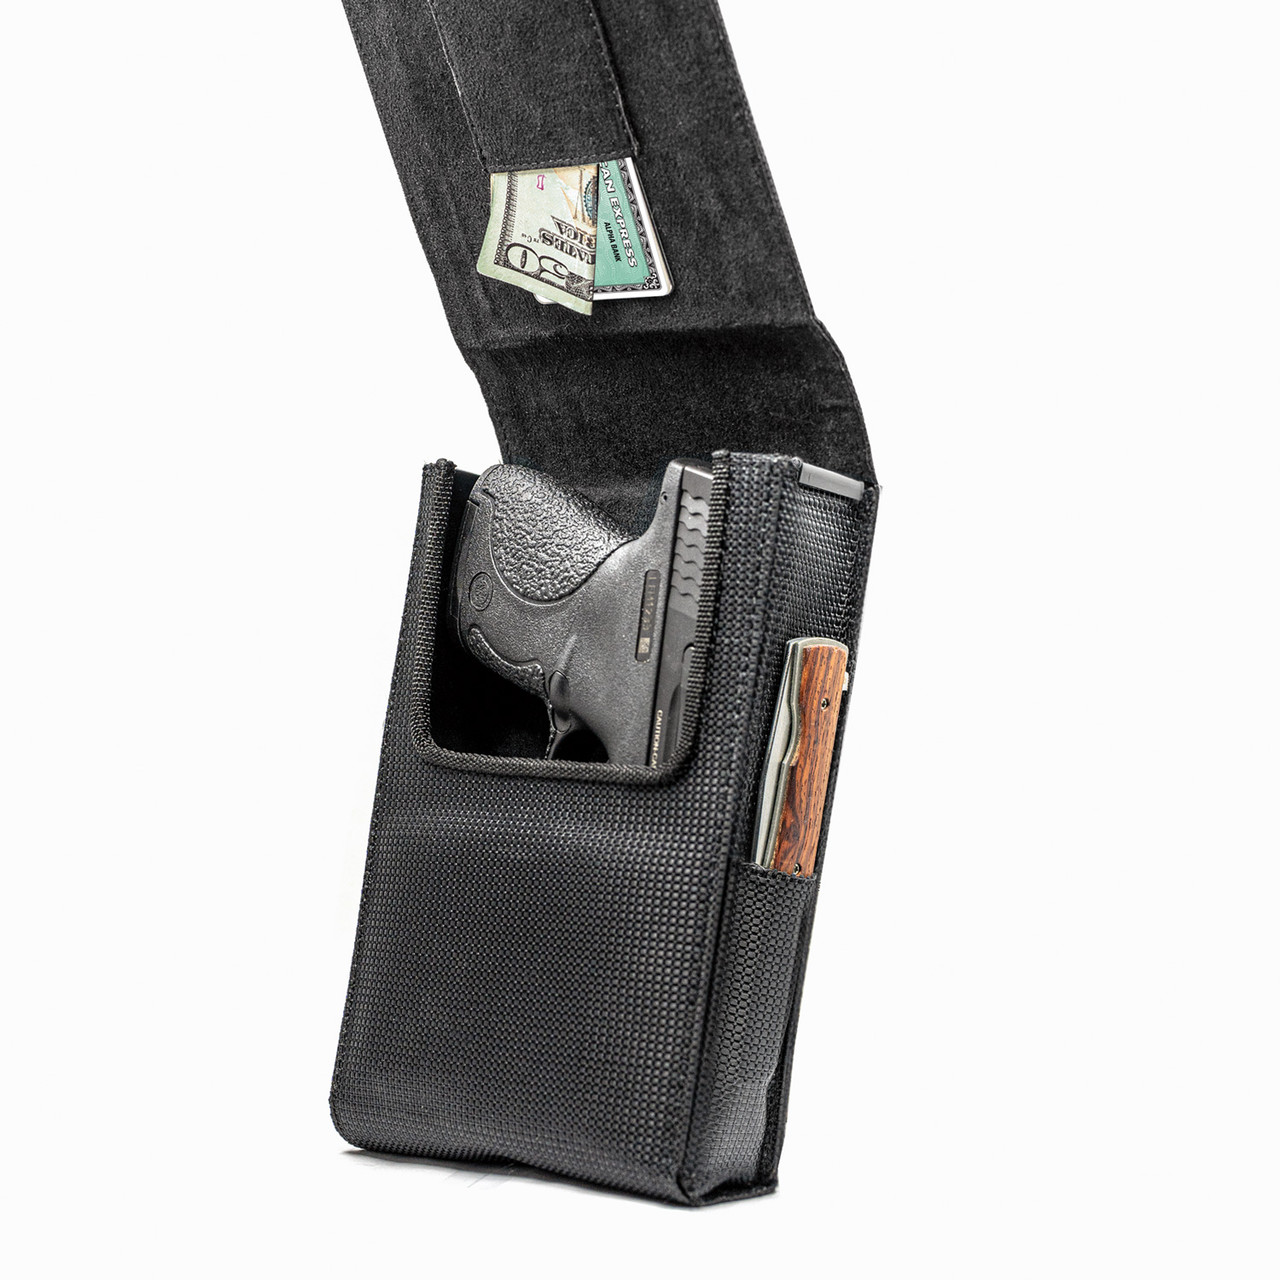 The Kahr PM45 Perfect Holster